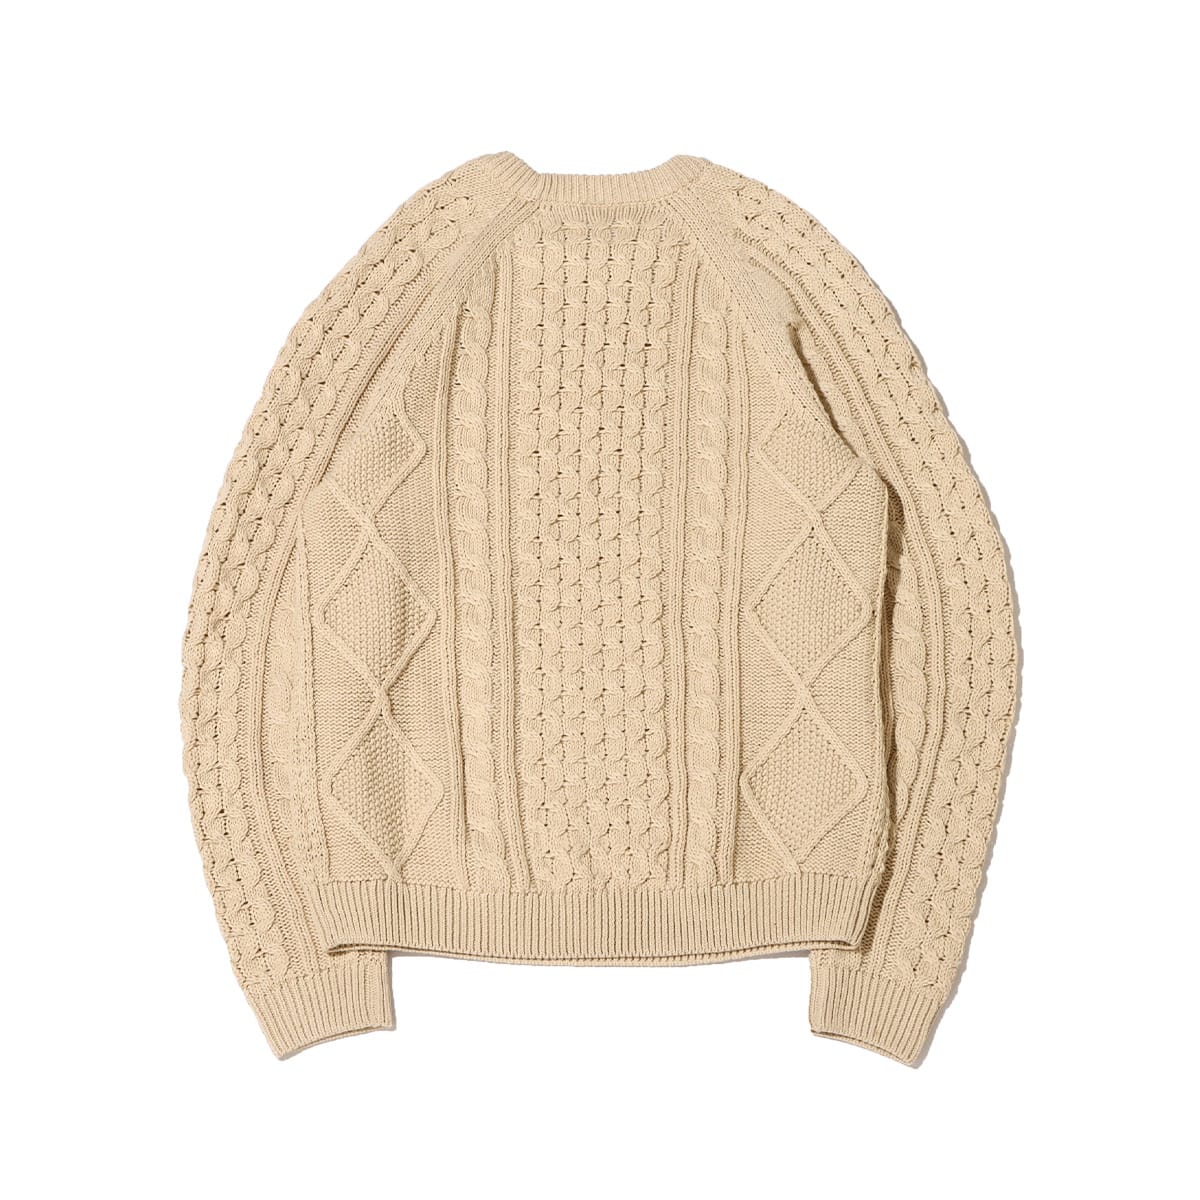 L NIKE AS M NL CABLE KNIT SWEATER 新品